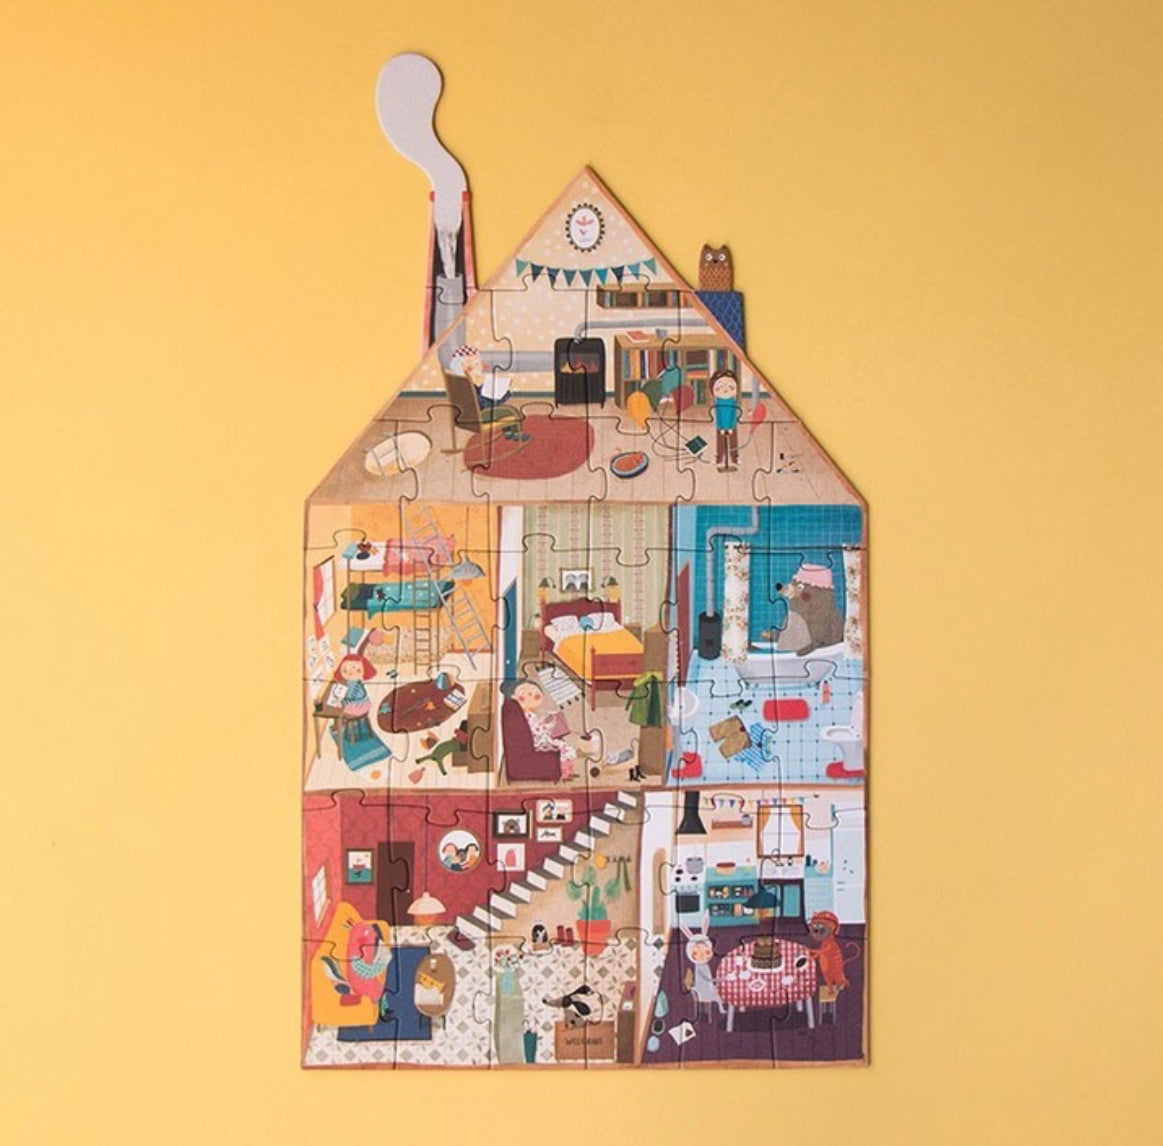 Puzzle - WELCOME TO MY HOME, Reversible!